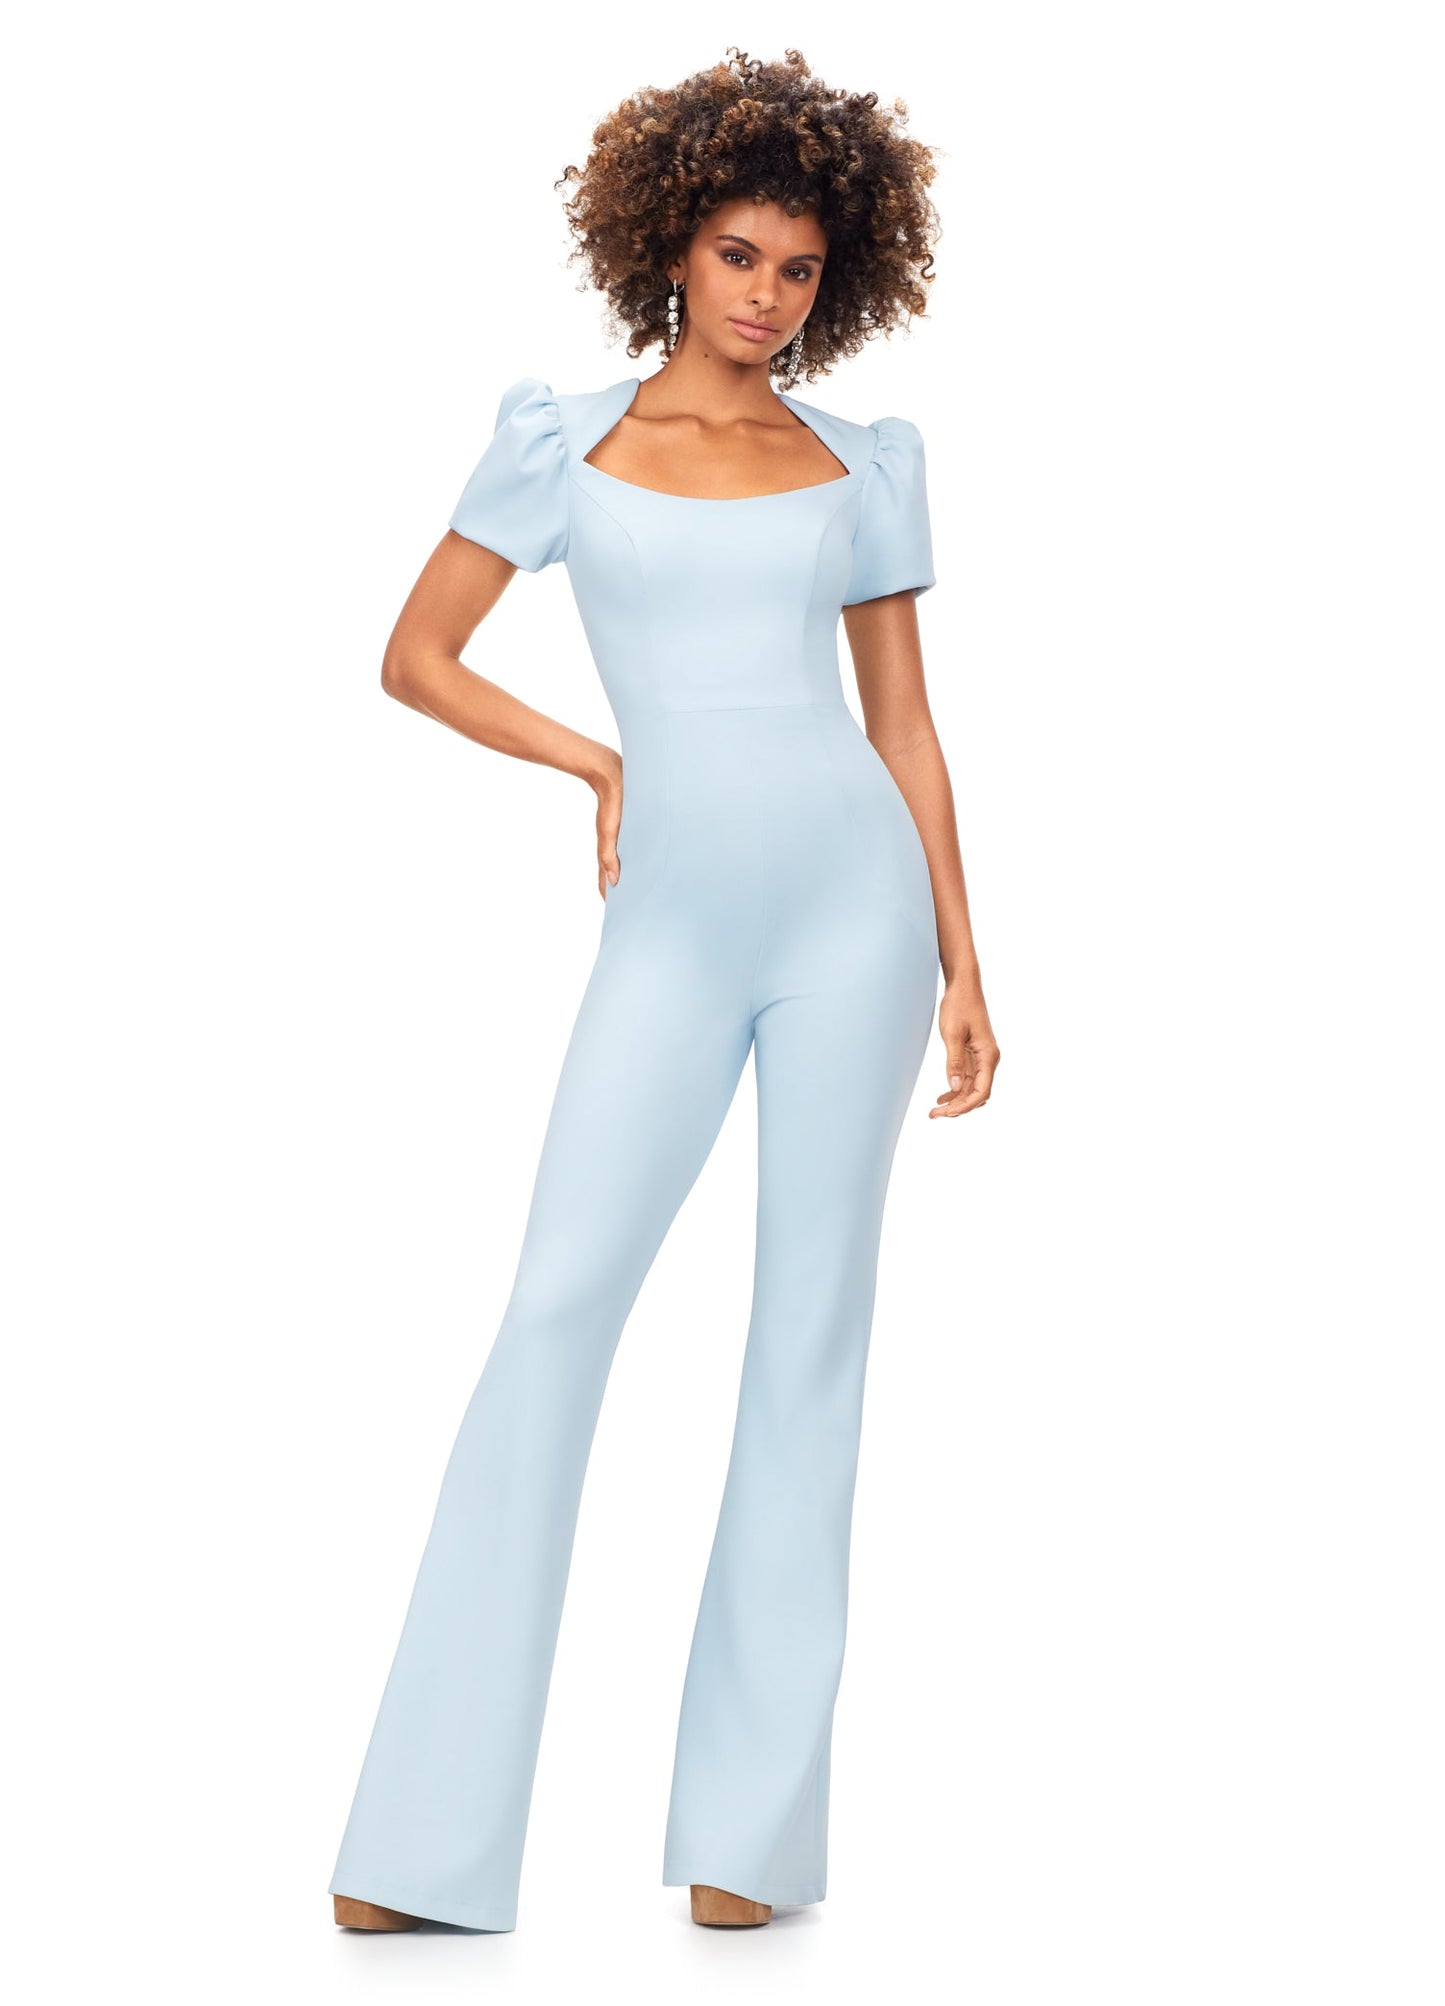 Ashley Lauren 11218 Long Puff Cap sleeve Fitted Scuba Pageant Jumpsuit Formal Wear The perfect jumpsuit is here! This scuba jumpsuit features a queen anne neckline and puff sleeves. Queen Anne Neckline Puff Sleeves Flare Pant Scuba Sizes: 00-24  Colors: Orchid, Sky, Red, Black